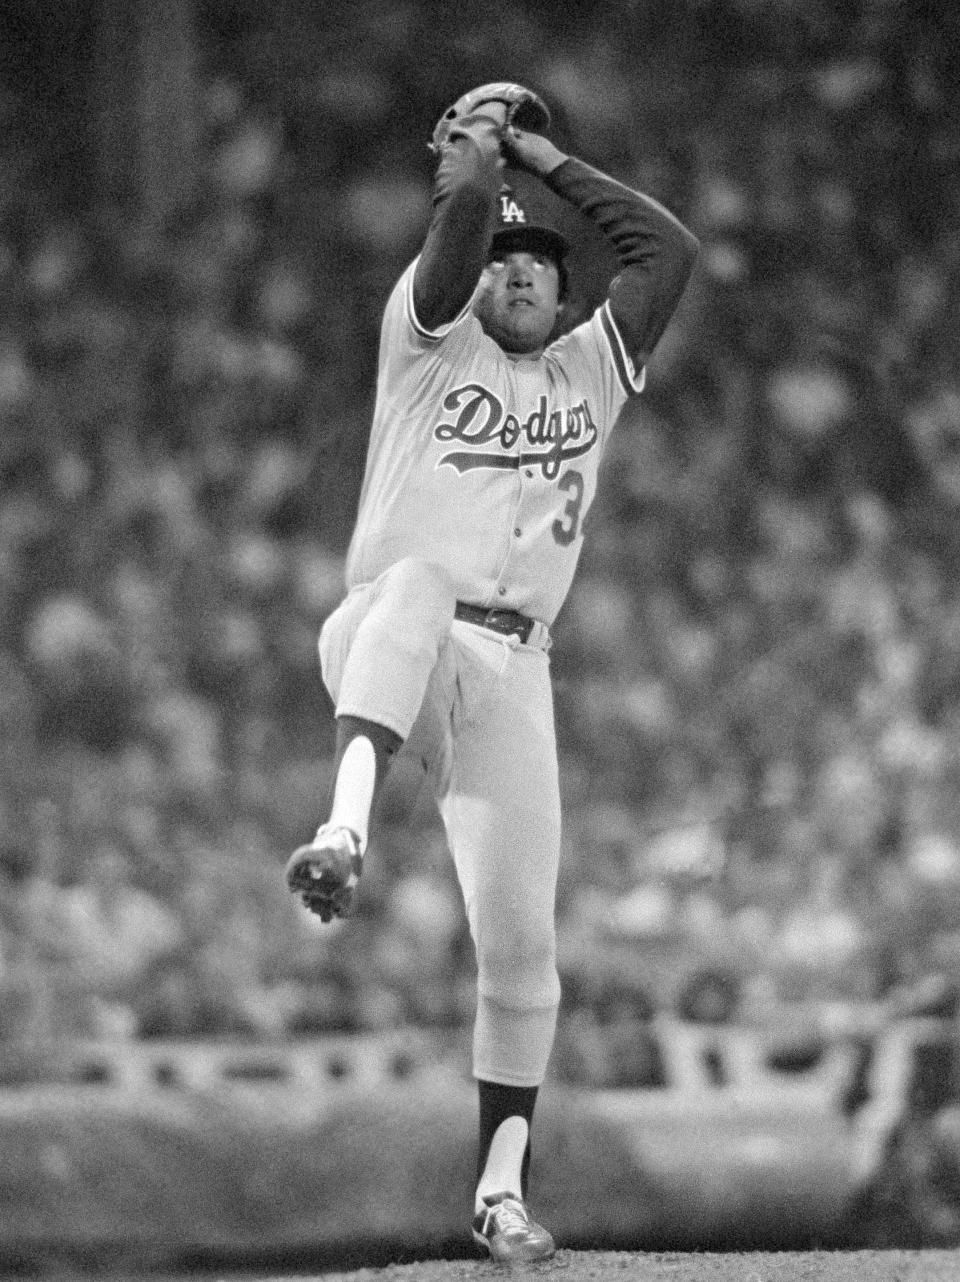 FILE - In this Aug. 8, 1981, file photo, Los Angeles Dodgers pitcher Fernando Valenzuela pitches in the All-Star game in Cleveland. The Dodgers needed a strike interrupted season and a pitching sensation named Fernando Valenzuela to win a championship in 1981. More important for the Dodgers, perhaps, is that they found a way that year to connect with Hispanic fans who nearly four decades later are still loyal supporters of the team. Author Jason Turbow tells PodcastOne Sports Now that the season was significant in many ways for the Dodgers, something he details in his new book ``They Bled Blue,'' a recap of a season like no other.(AP Photo/File)